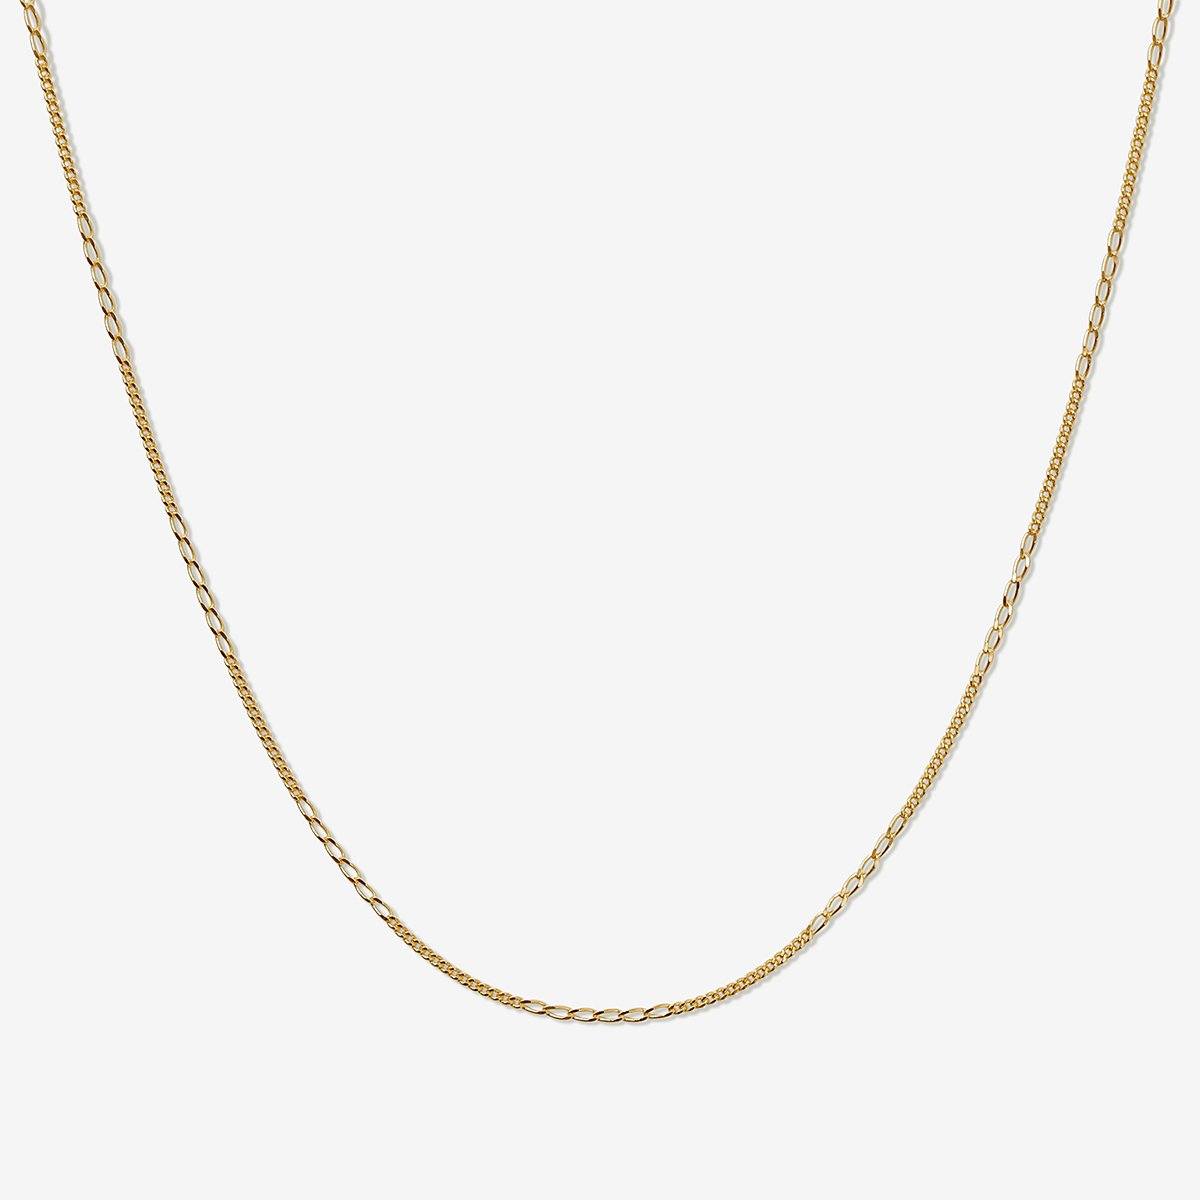 Genesis ornate curb chain necklace